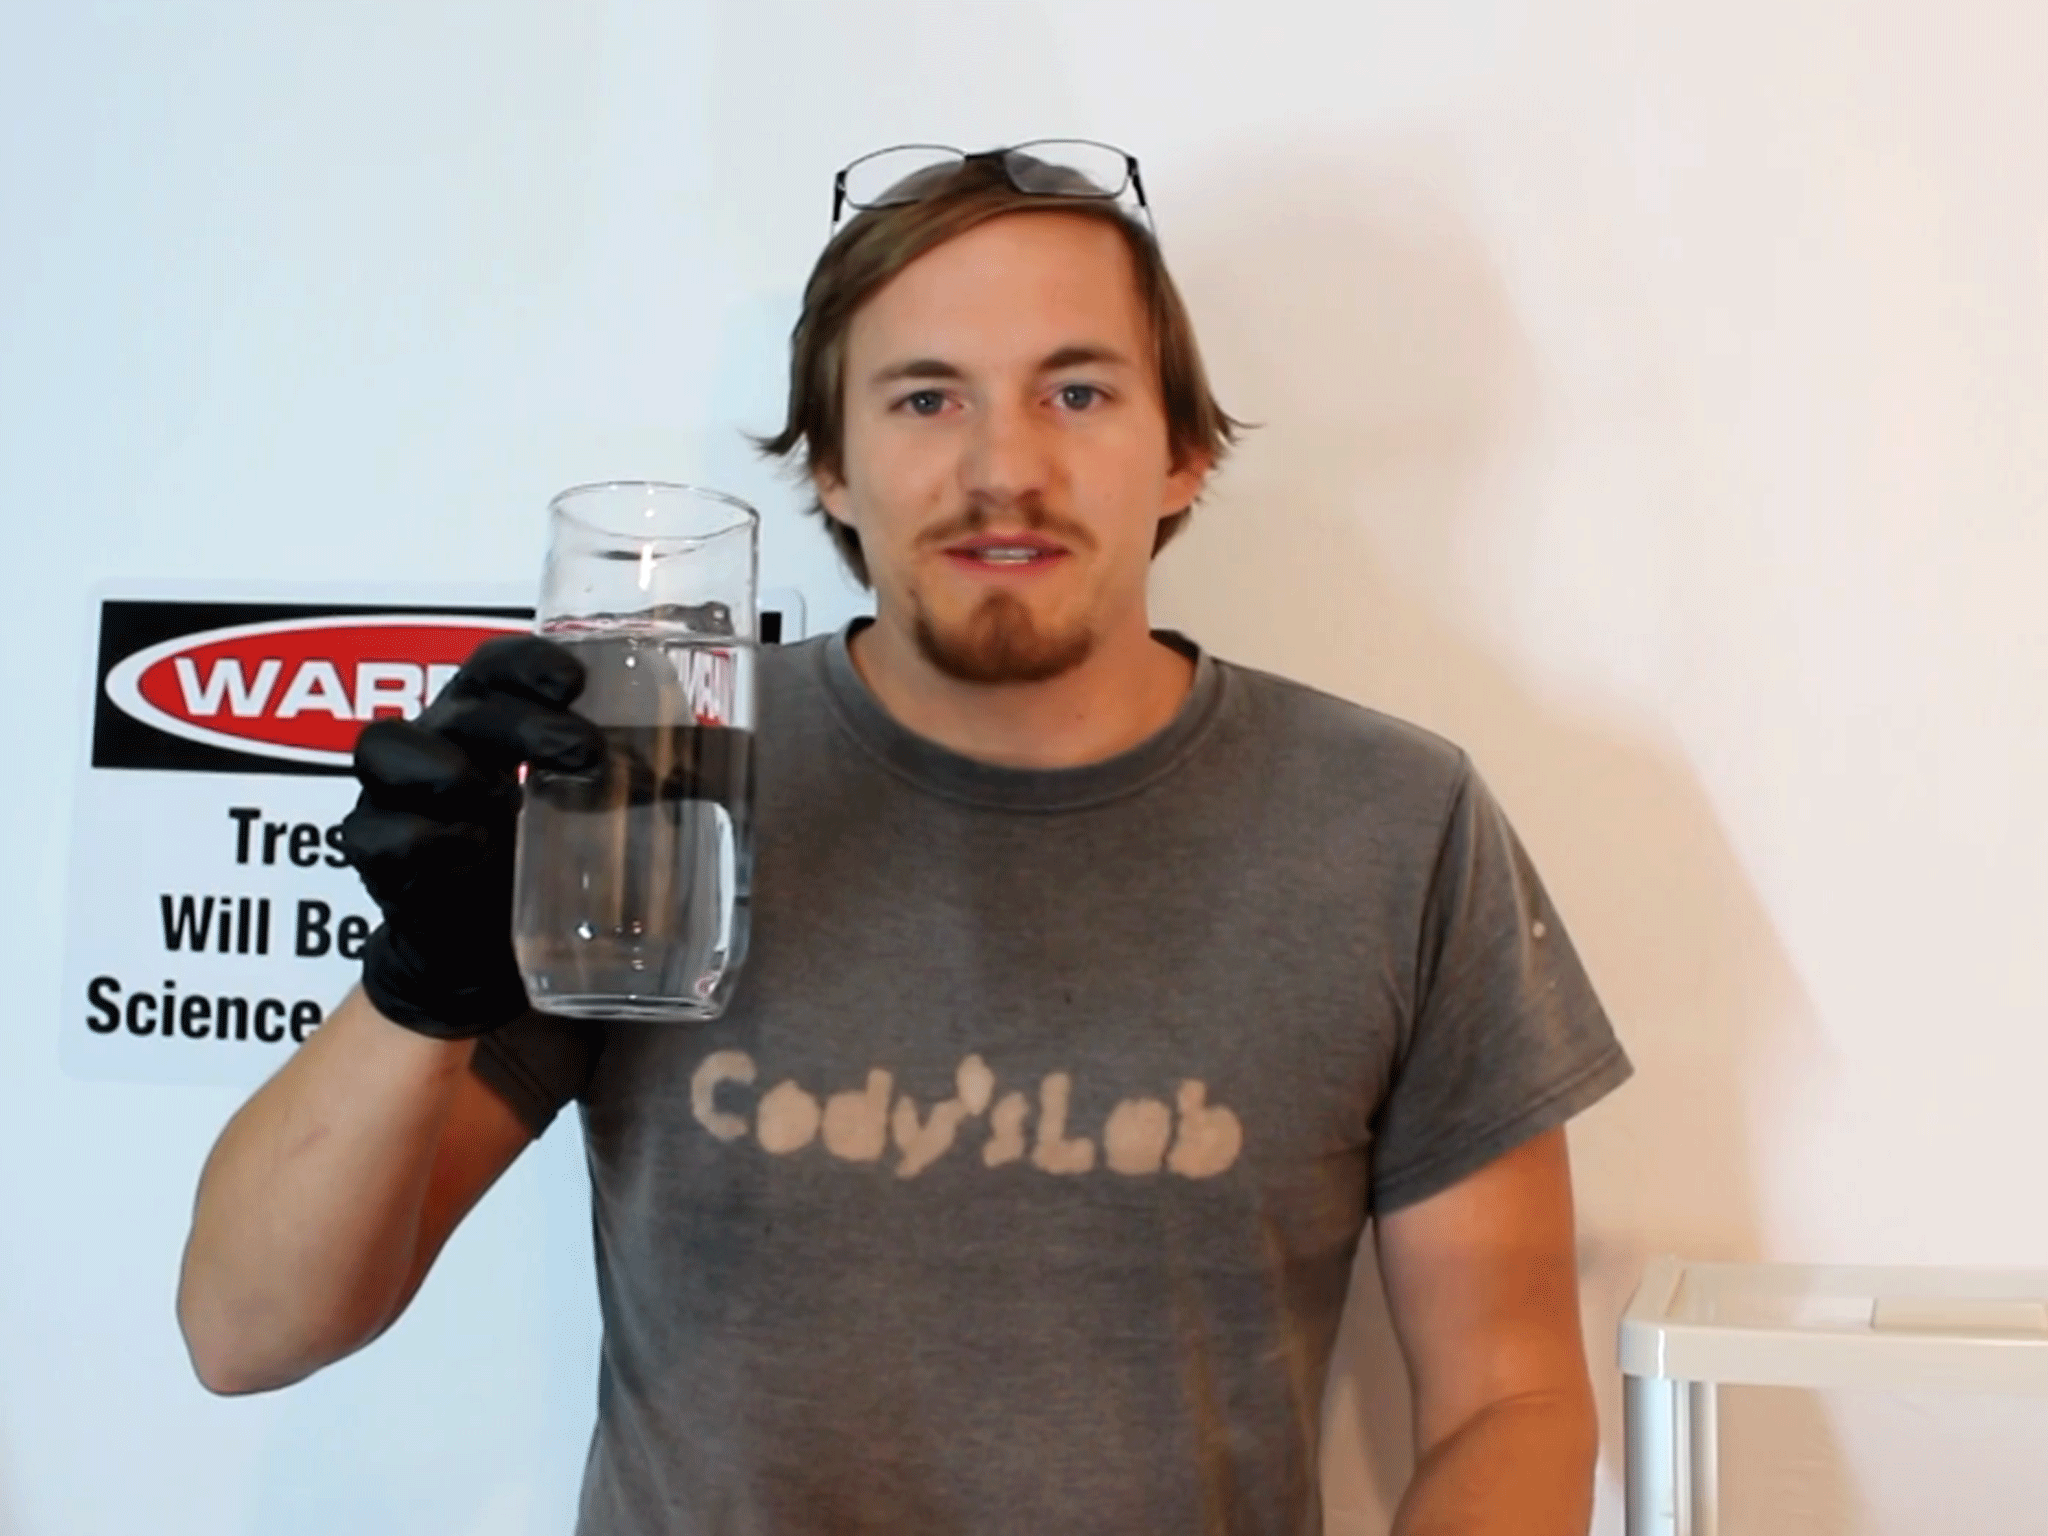 Cody Don drinks cyanide in a YouTube video